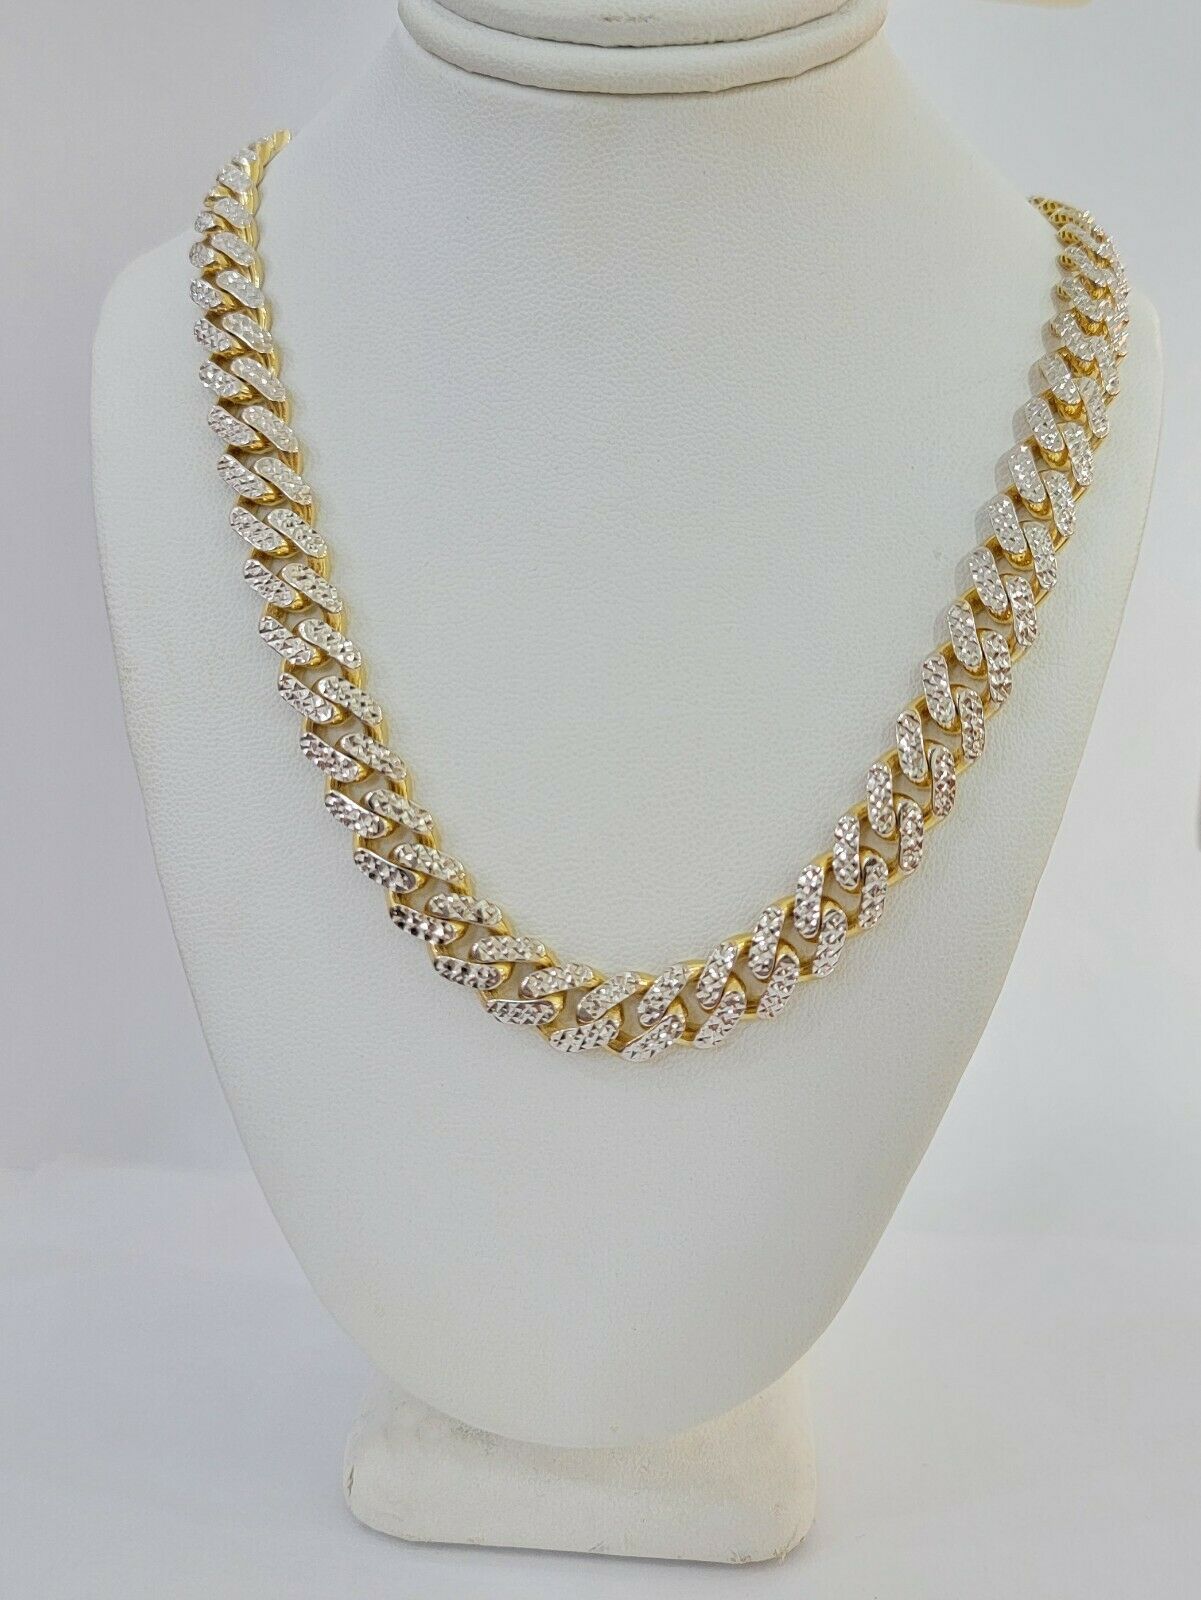 10k Gold Monaco Chain Necklace 9mm 24" Two-tone Diamond Cut REAL 10kt Gold SALE